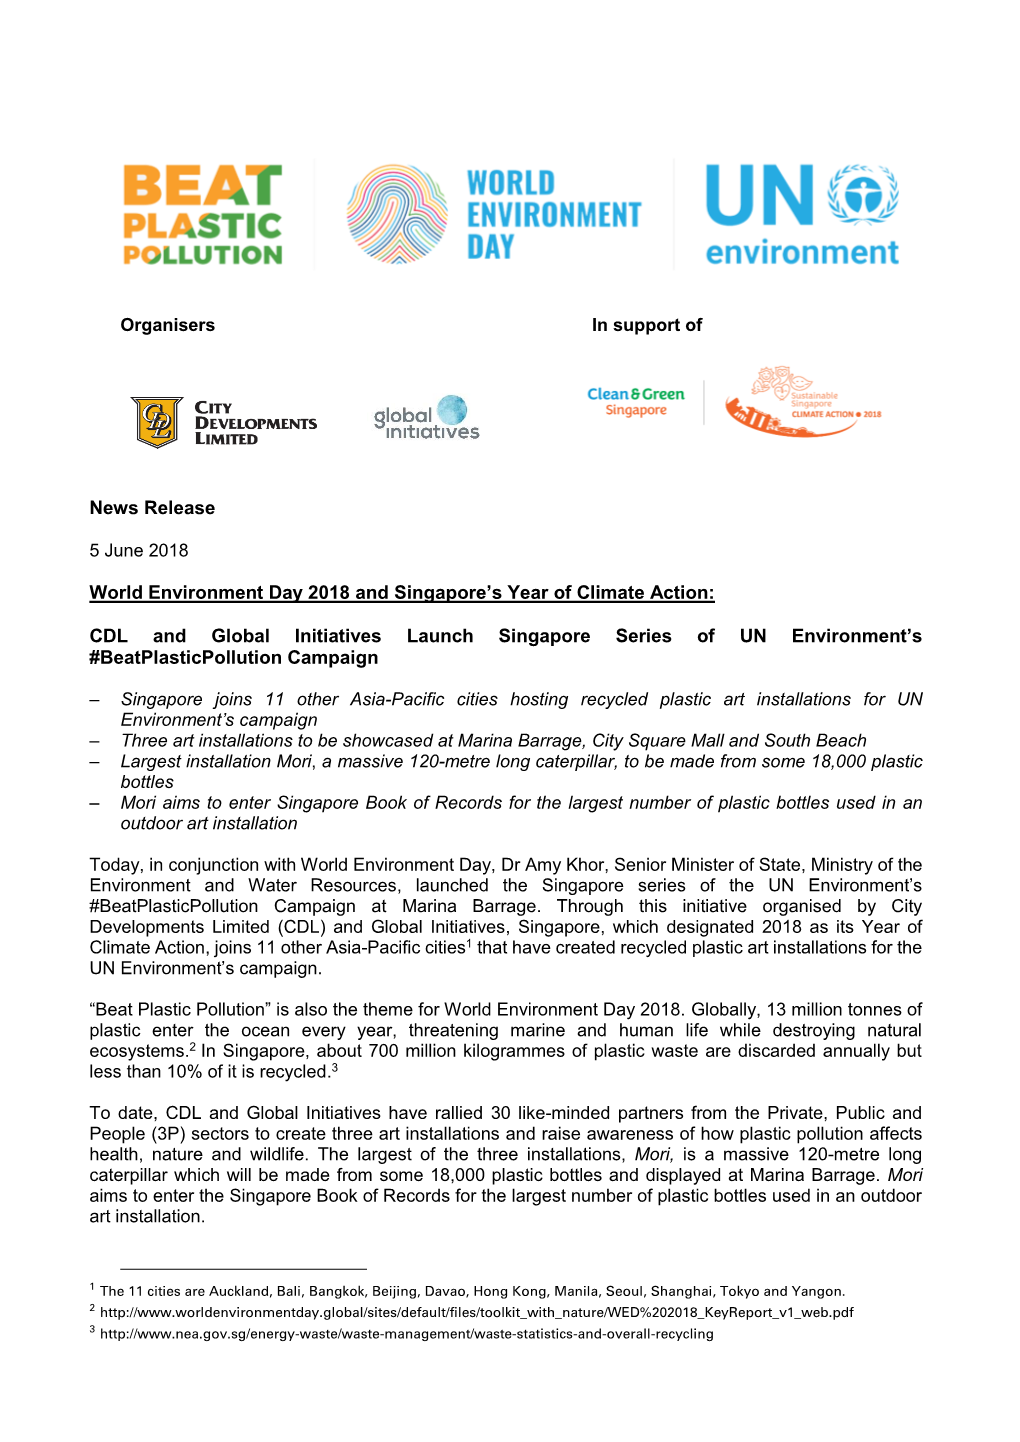 News Release World Environment Day 2018 and Singapore's Year of Climate Action